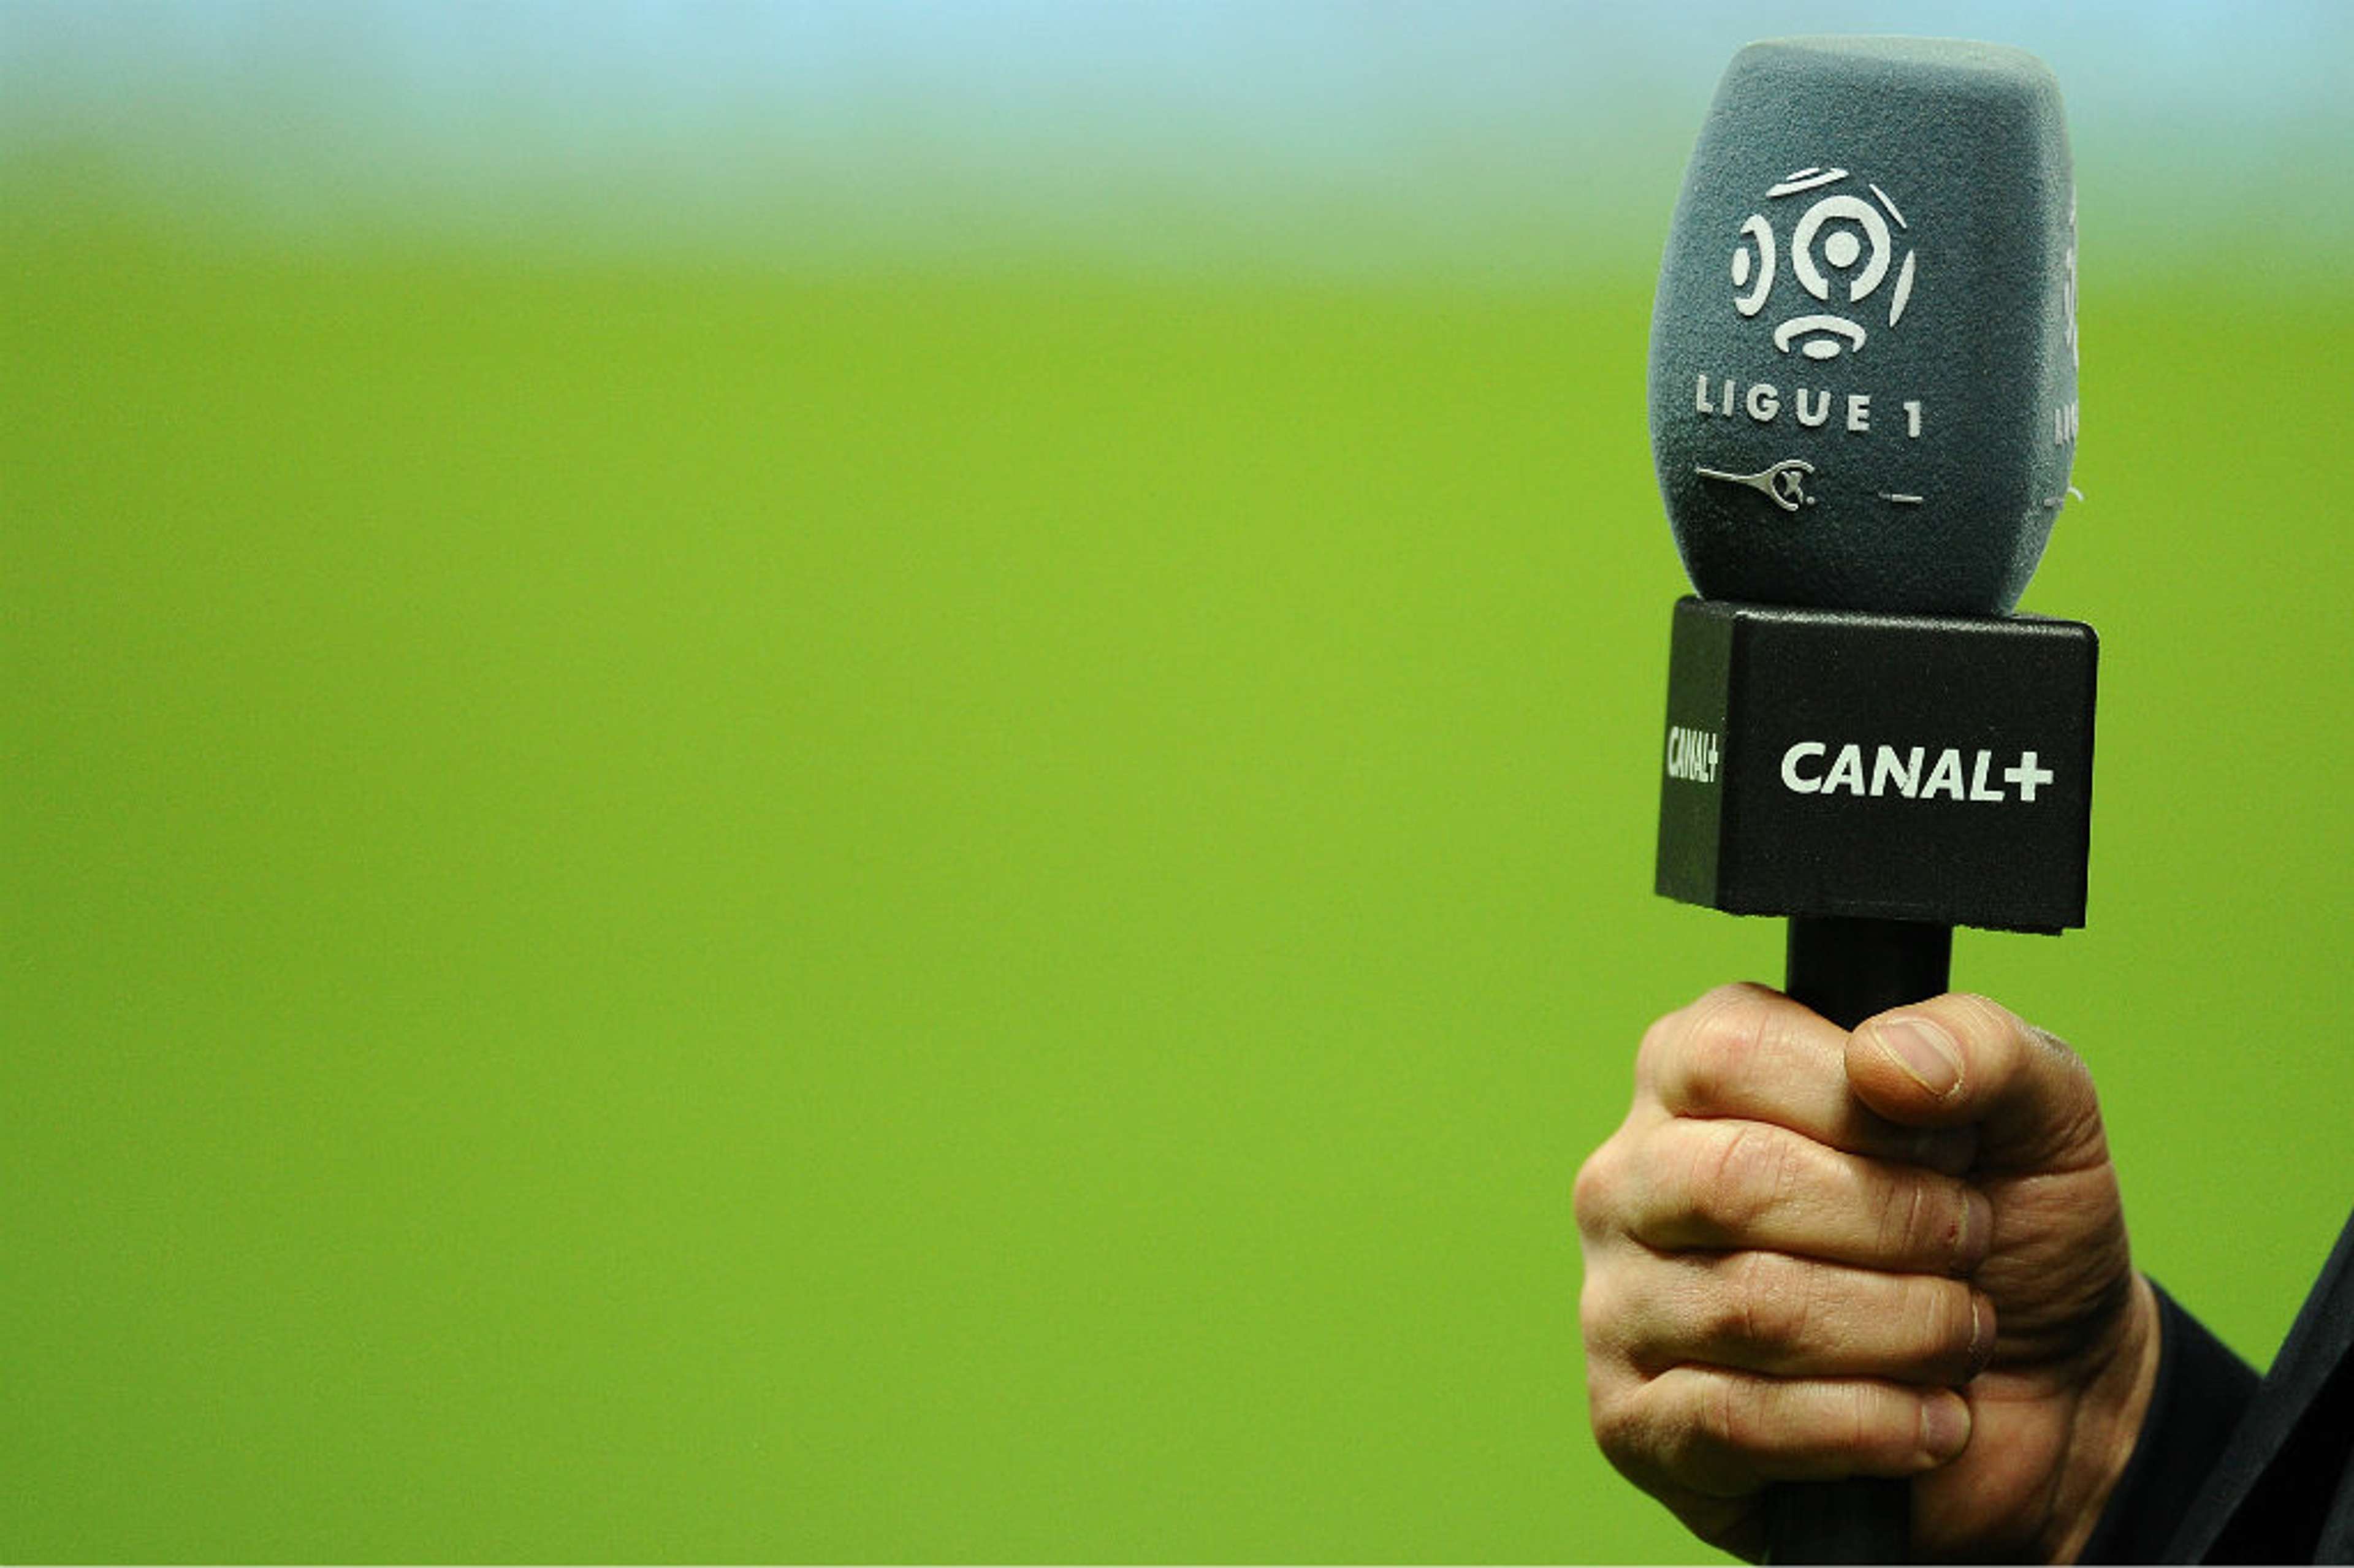 Canal+ Ligue 1